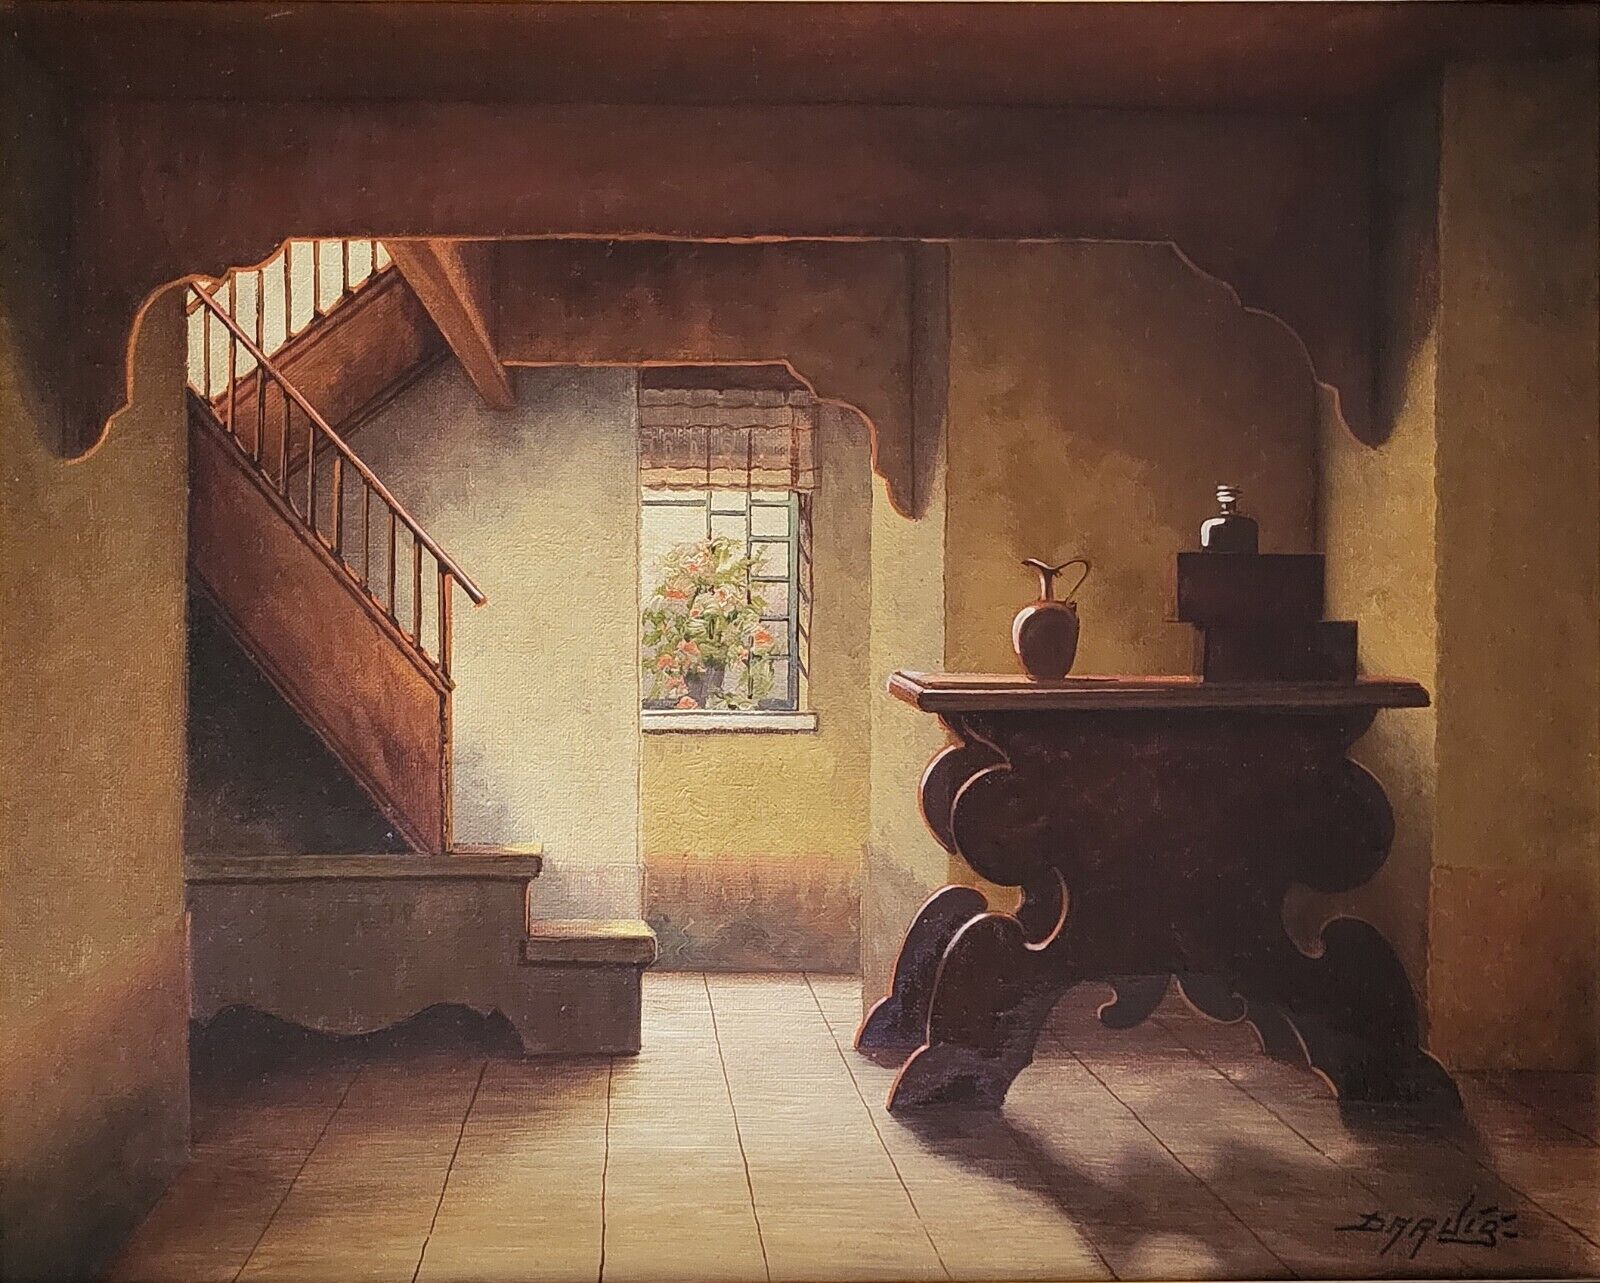 Oil painting Kaj Peter Darvig(1912-?): “Interior with a staircase”